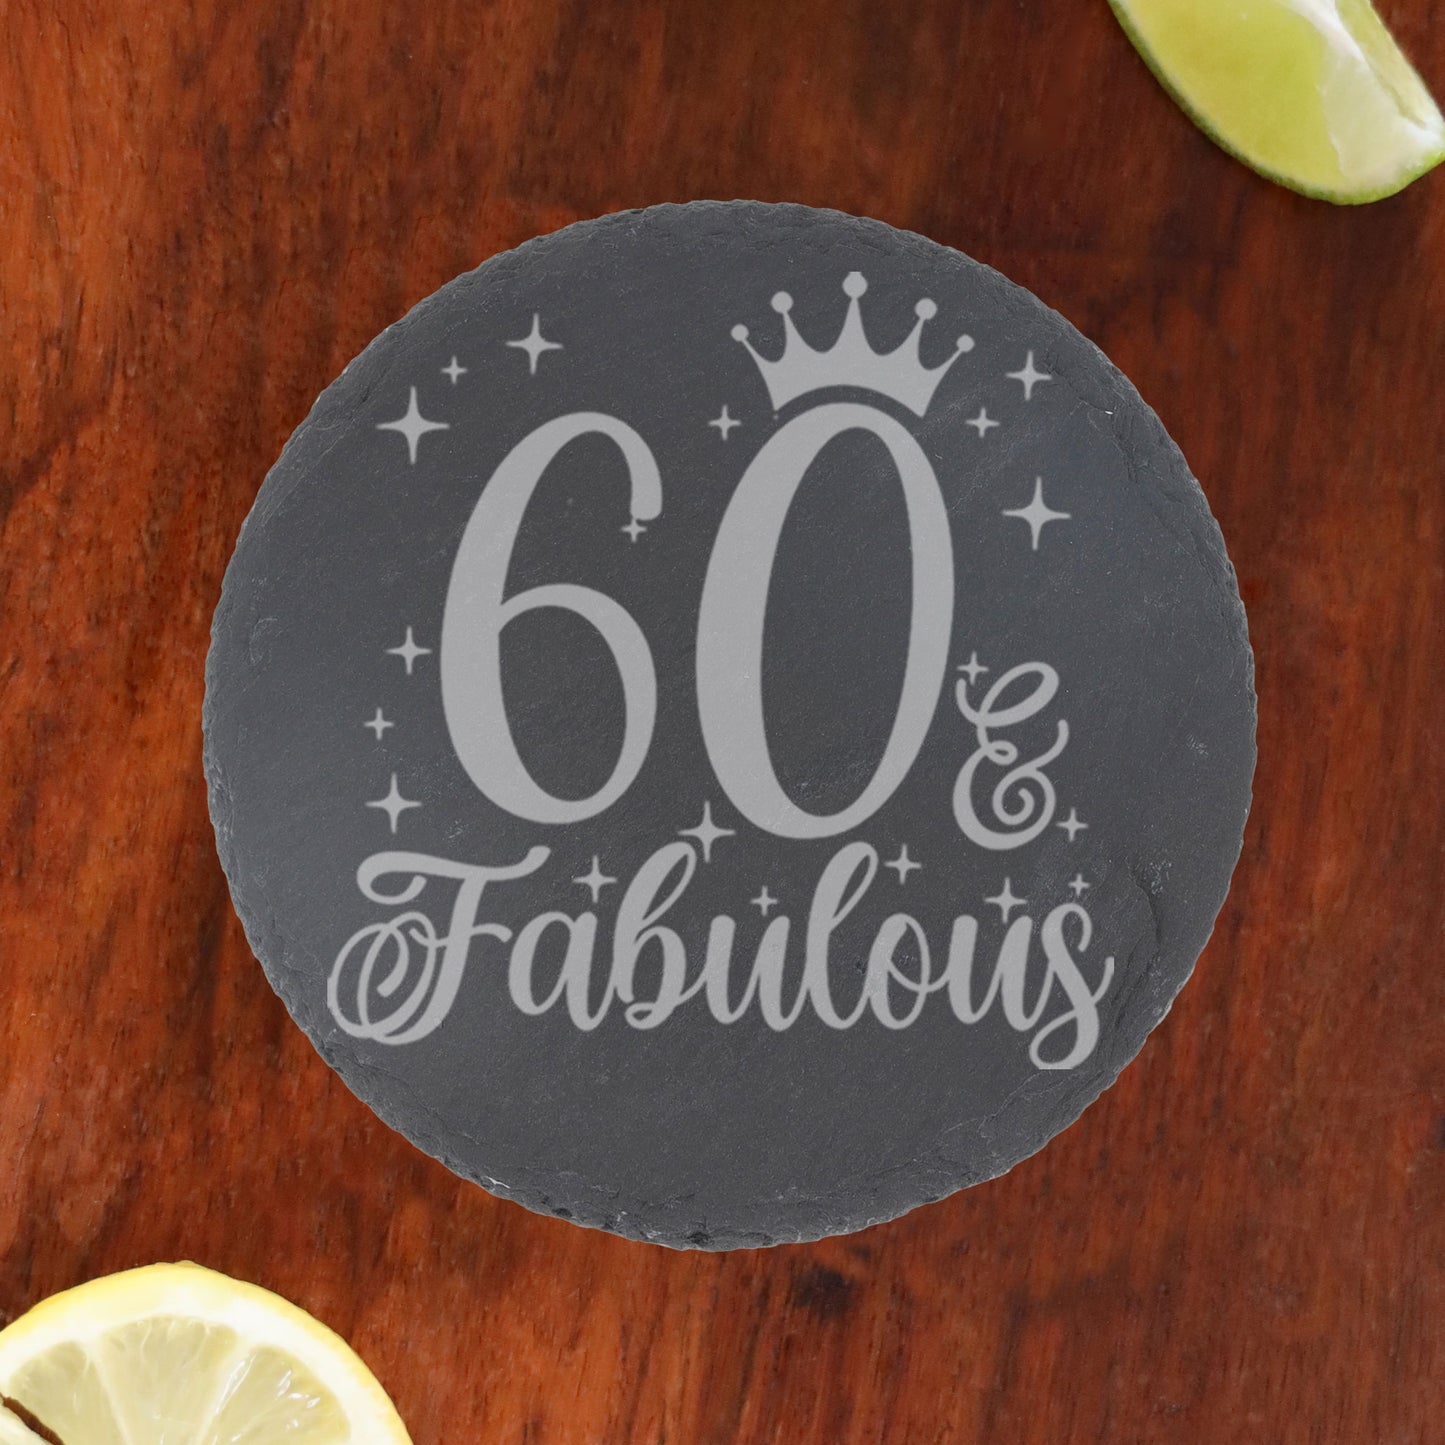 60 & Fabulous 60th Birthday Gift Engraved Wine Glass and/or Coaster Set  - Always Looking Good - Round Coaster Only  